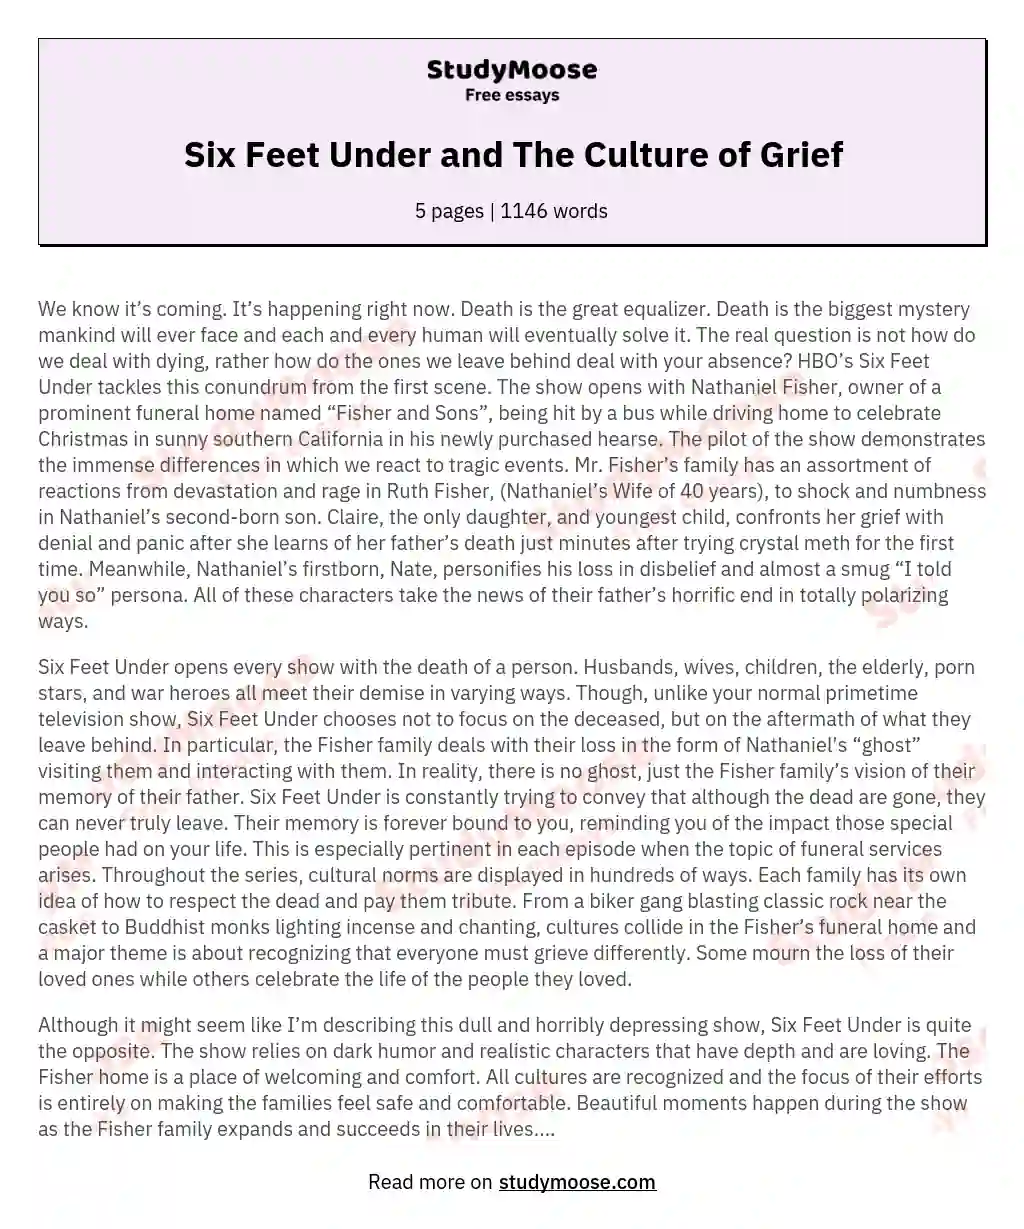 Six Feet Under and The Culture of Grief essay